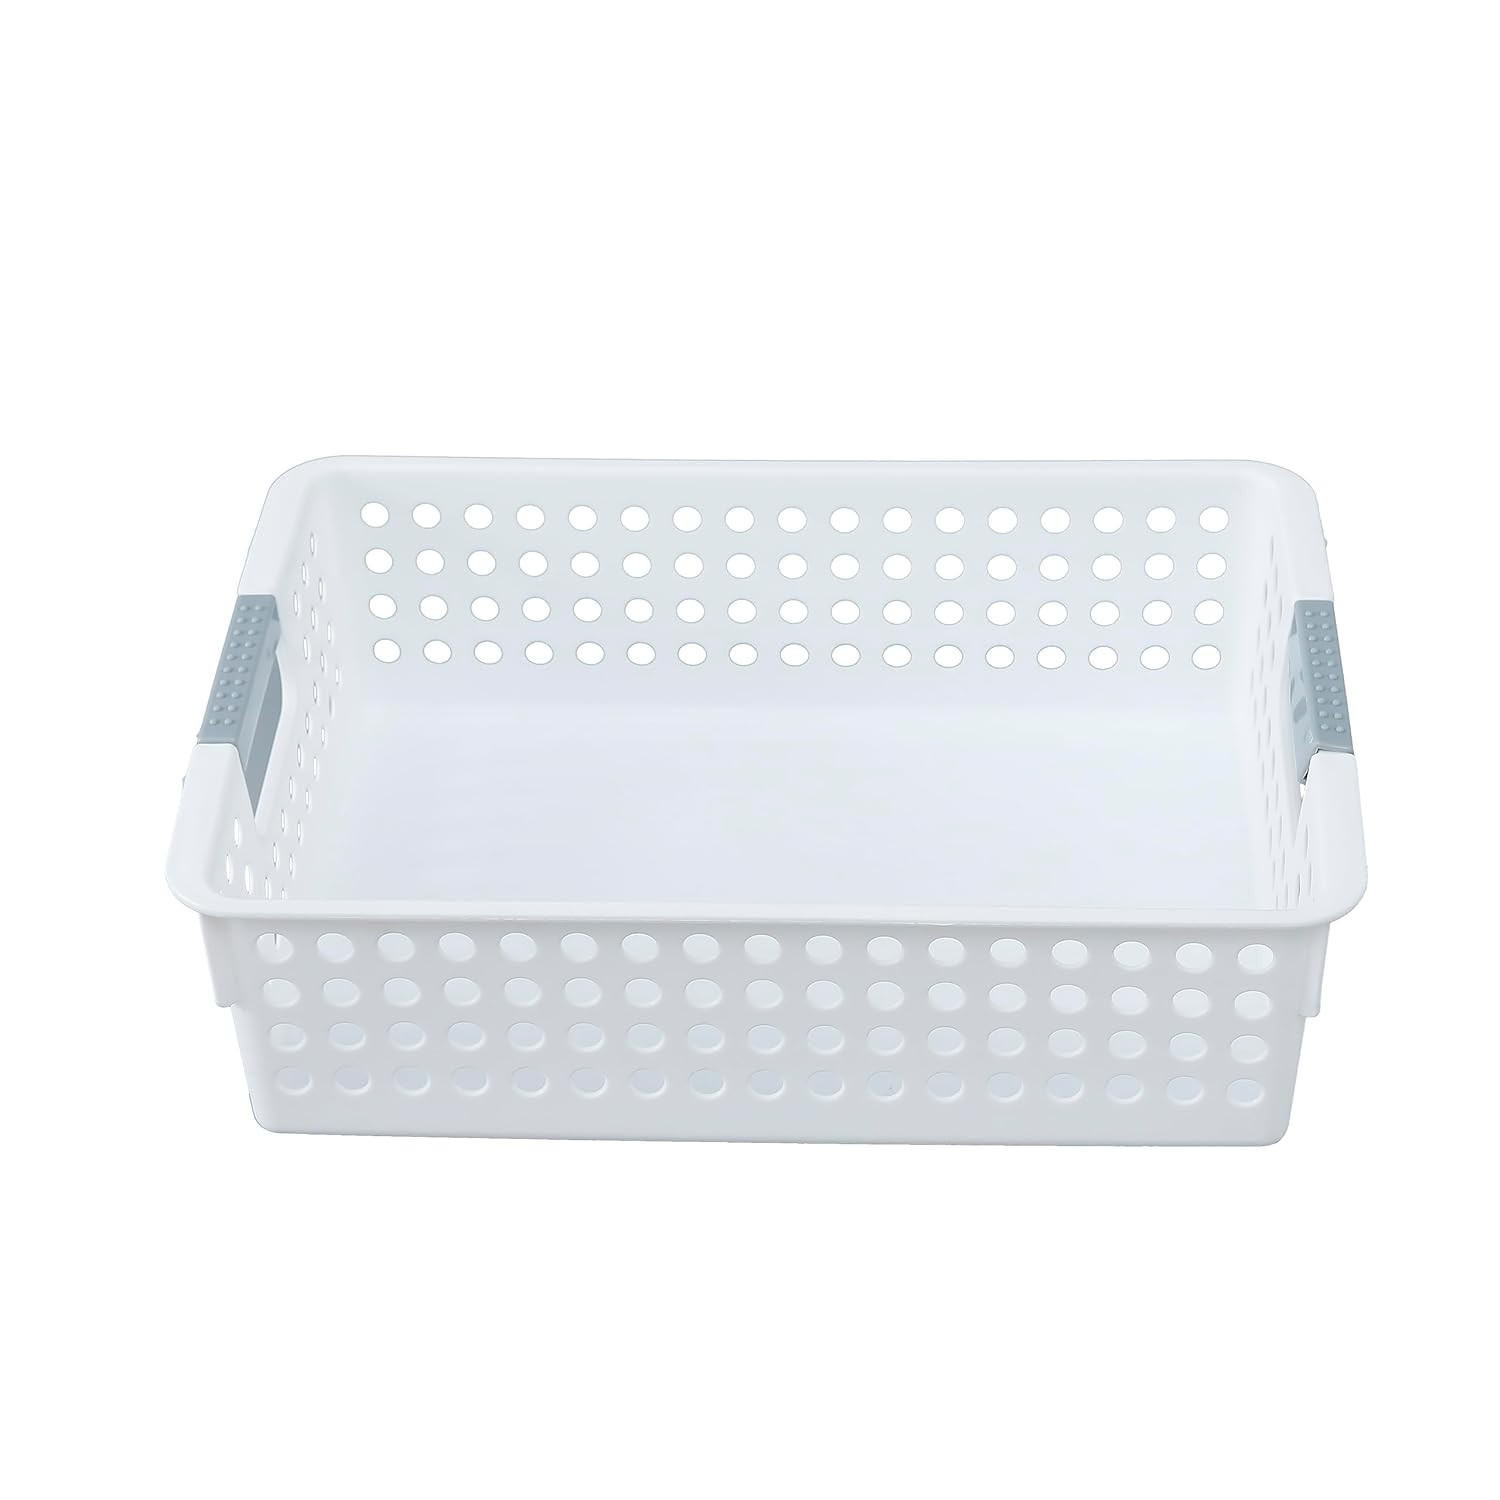 Kuber Industries Small Hollow Storage Basket|Kitchen & Home Organizer For Wardrobe|Tray For Toys, Fruits, Books (White)